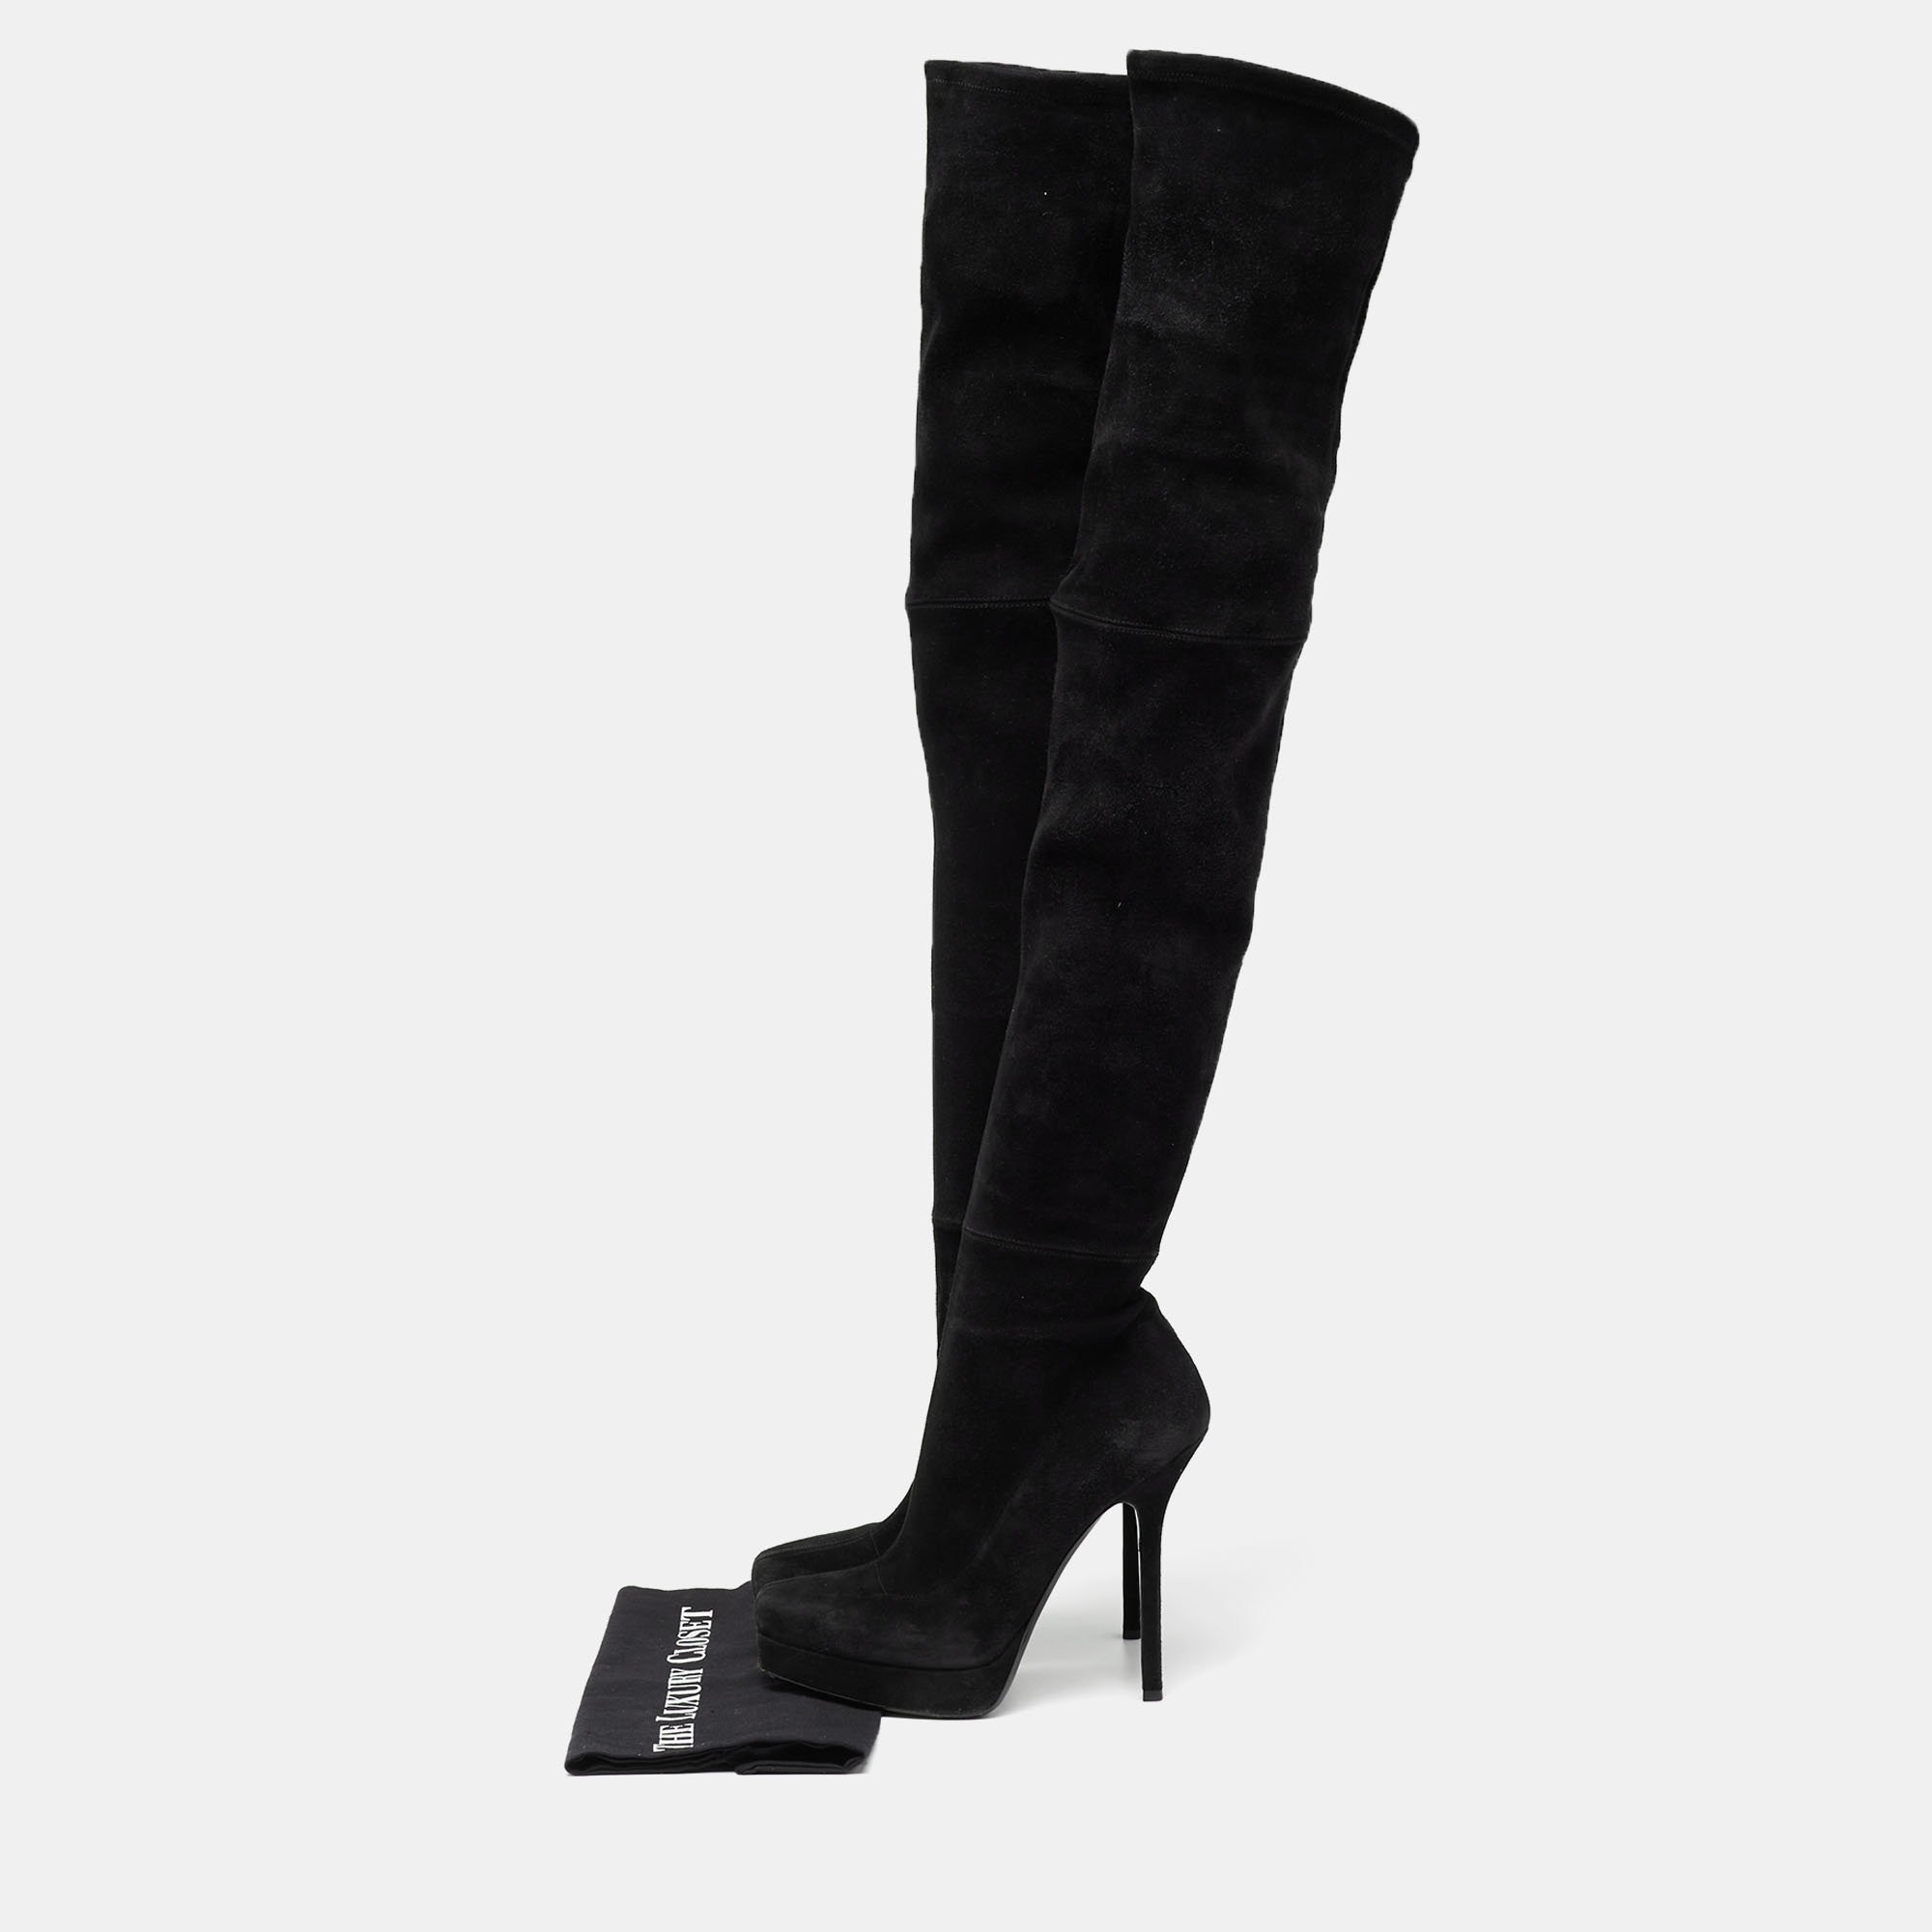 Gucci Black Suede Platform Over The Knee Boots Size 38.5